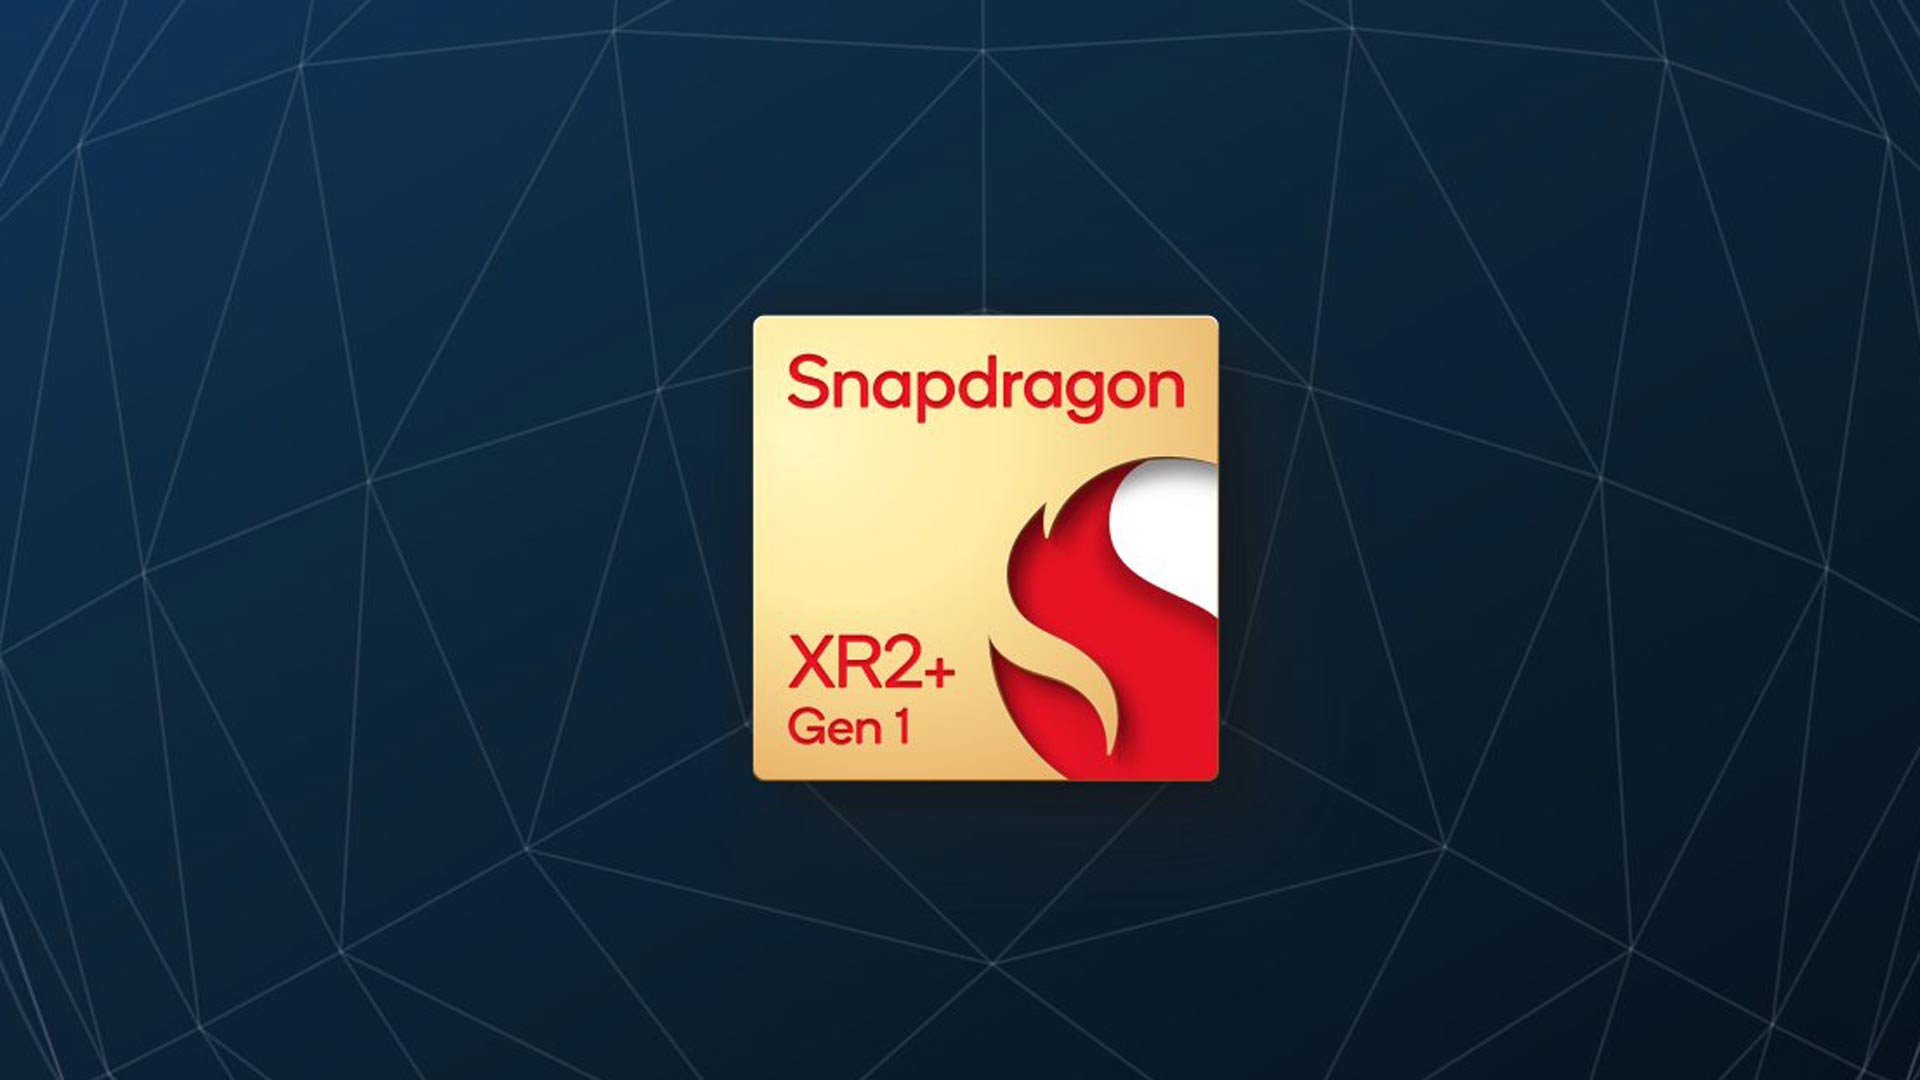 Qualcomm Says Multiple Snapdragon XR2+ Devices Will be Announced by Year’s End – Road to VR